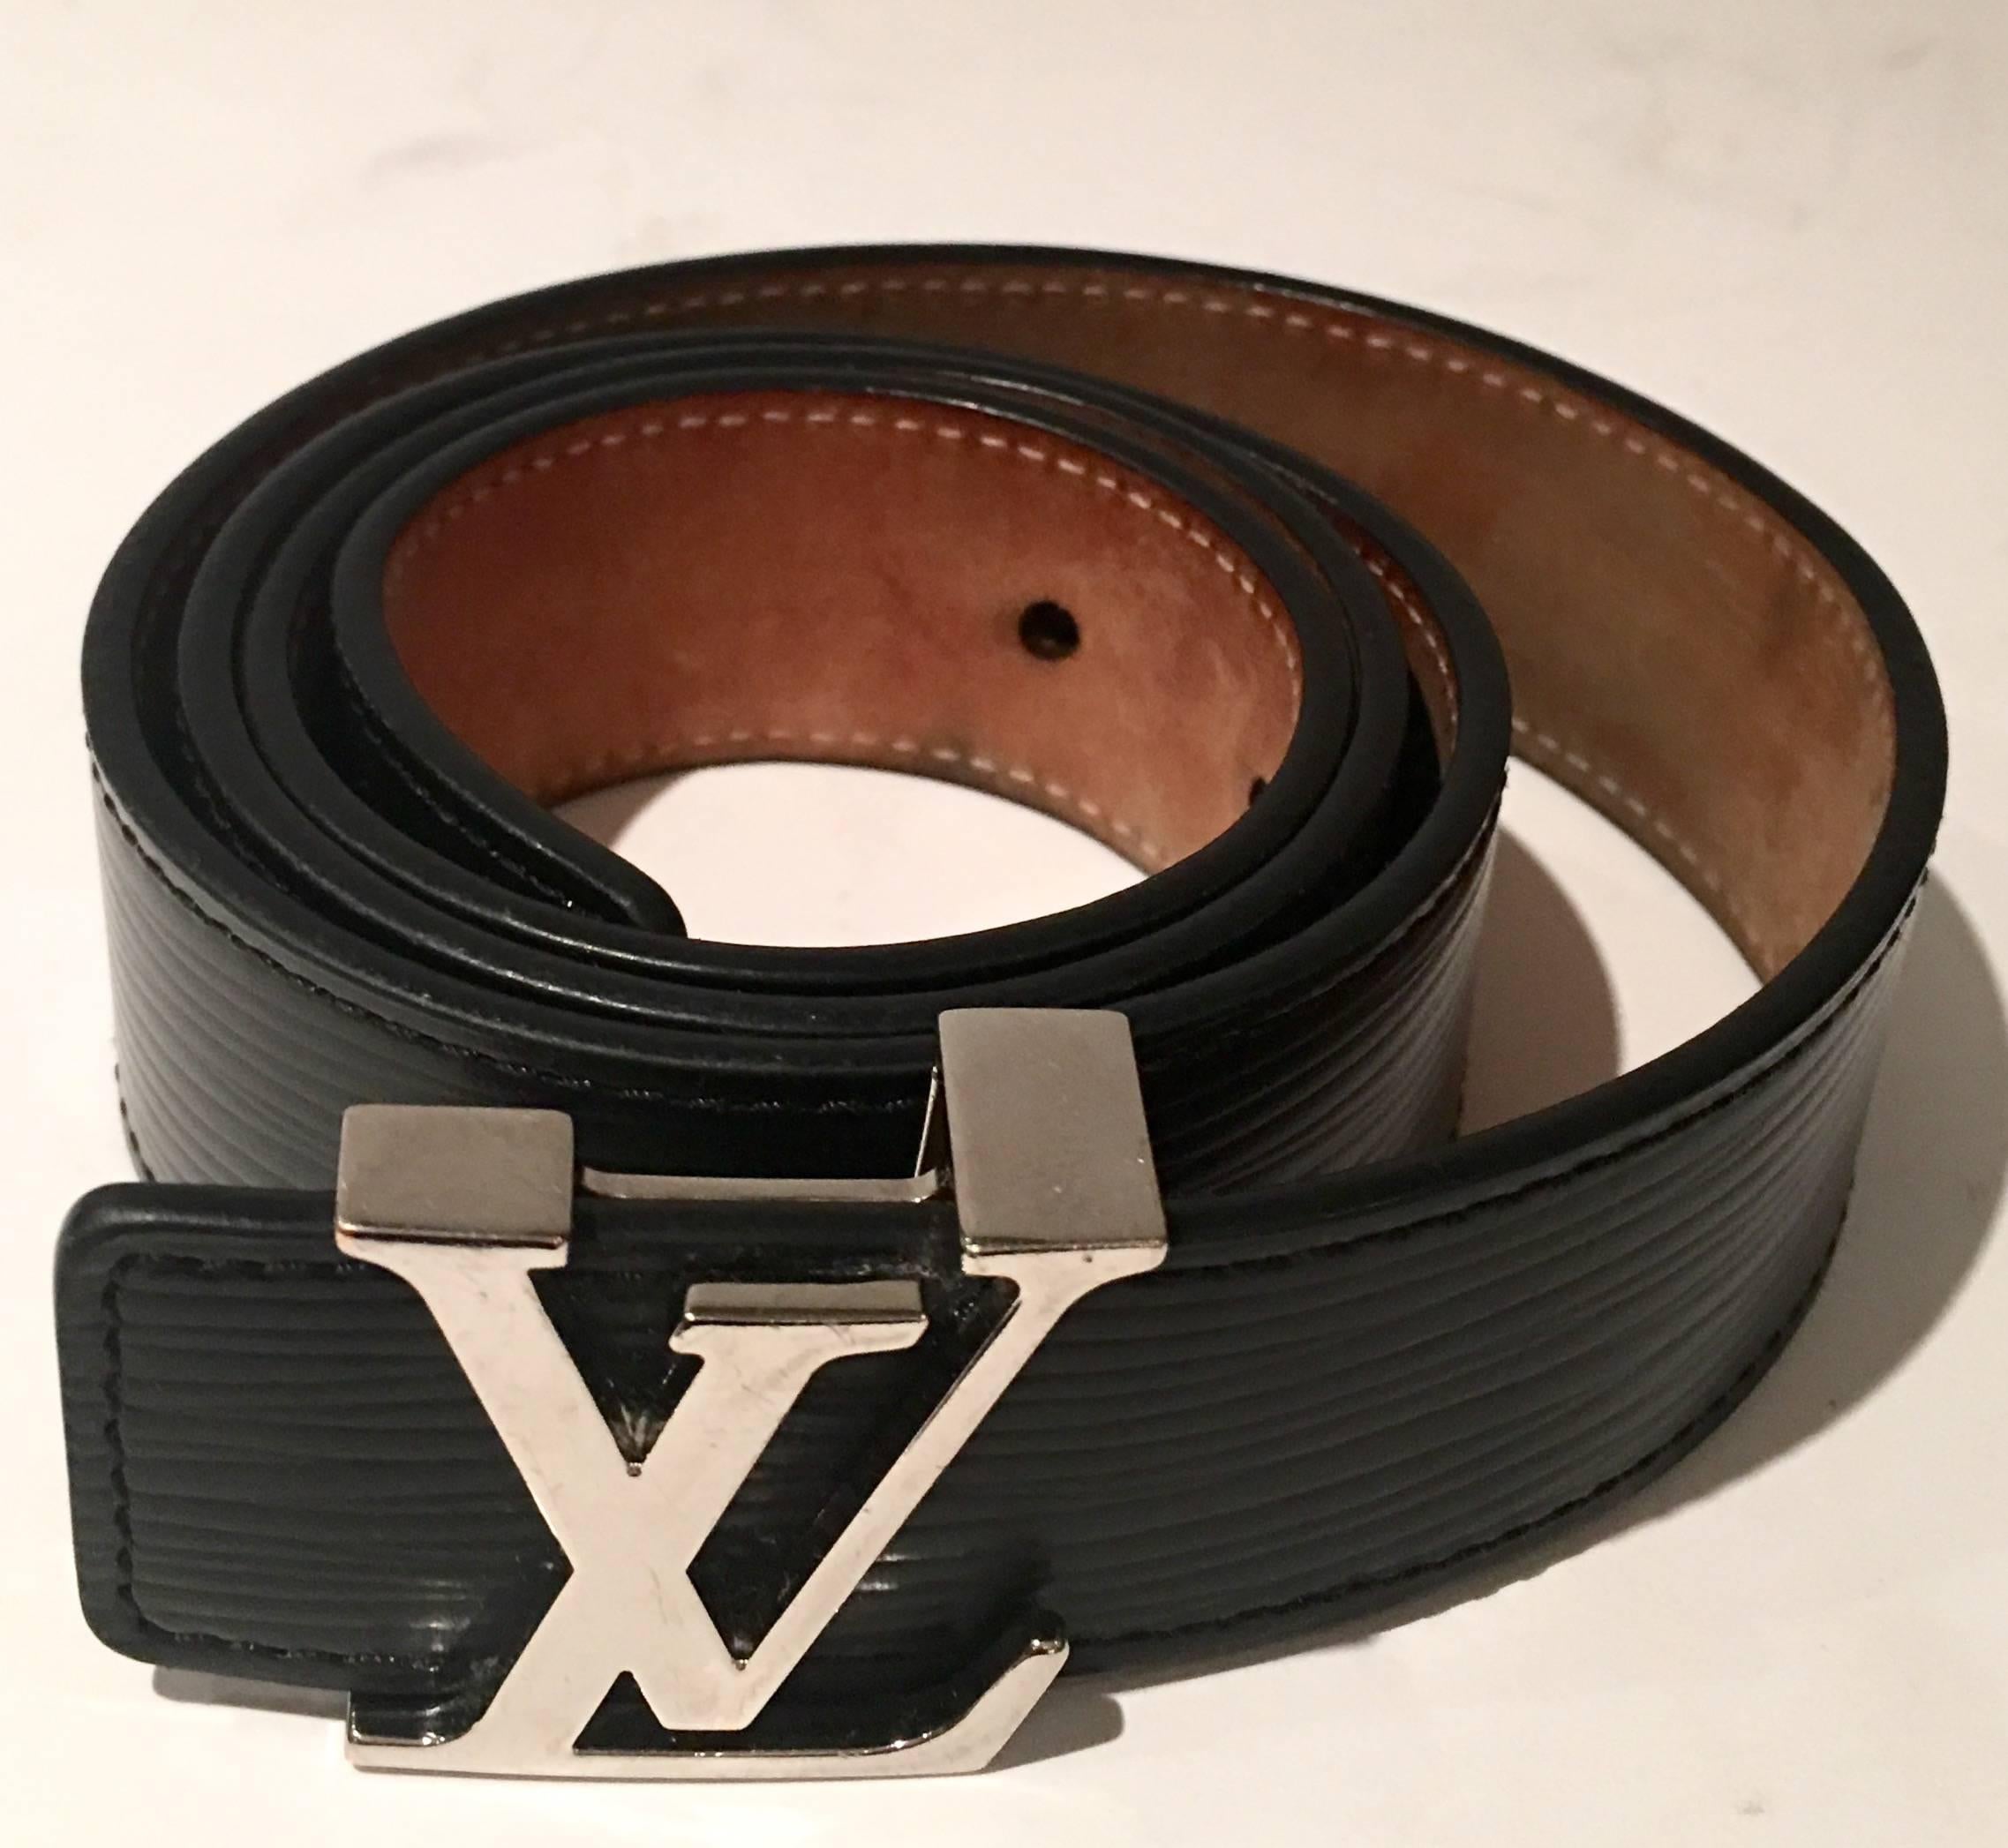 Louis Vuitton black "Epi" leather and silver chrome "LV" logo buckle belt. Strap size 32/80cm. Buckle measures 1.5" H x 1.5" L x .75" depth. Strap measures,
1.25" inches in height.
 